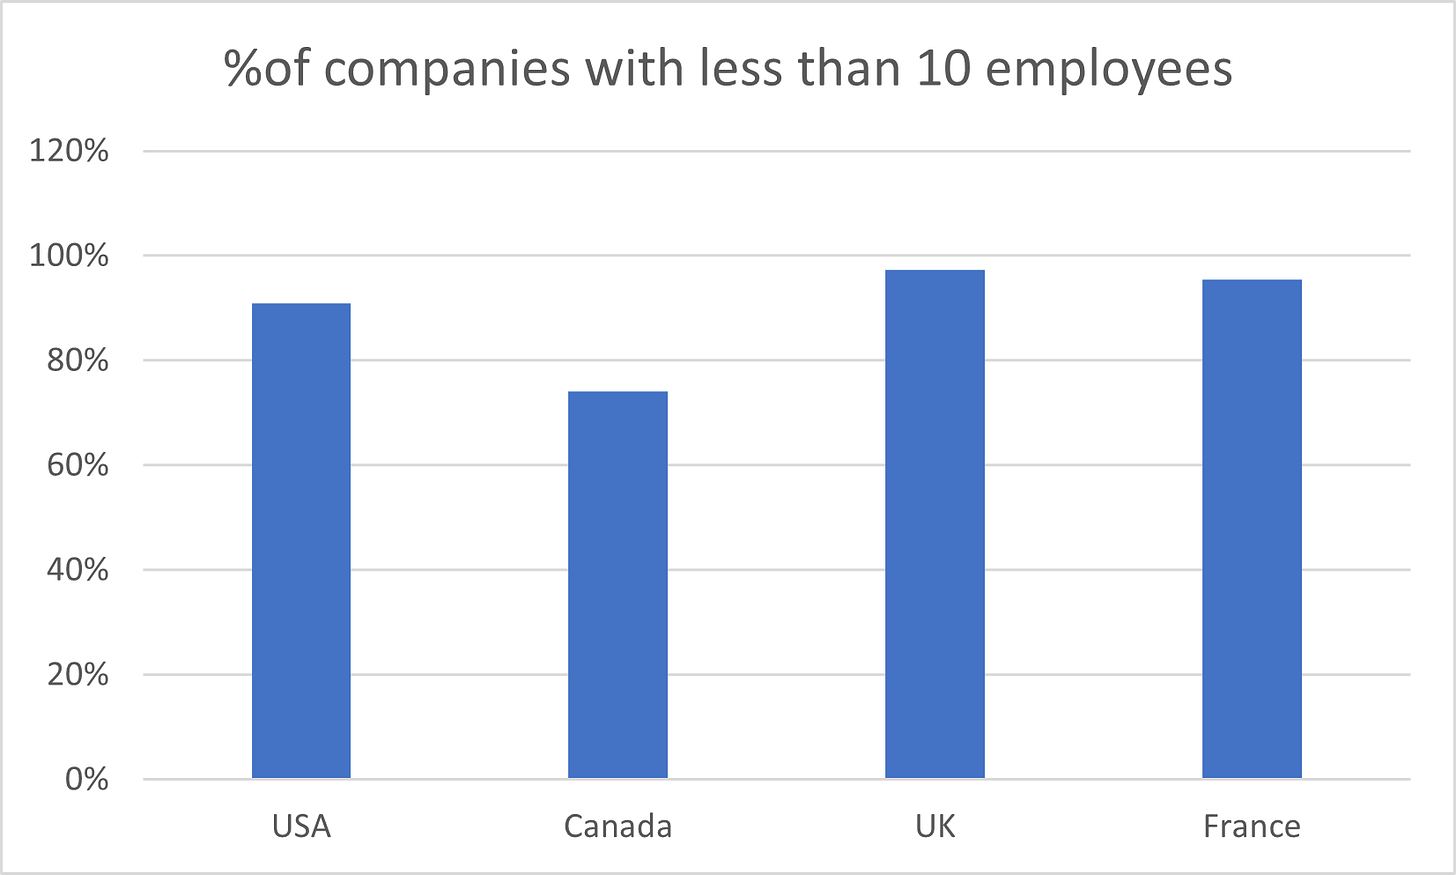 %of companies with less than 10 employees